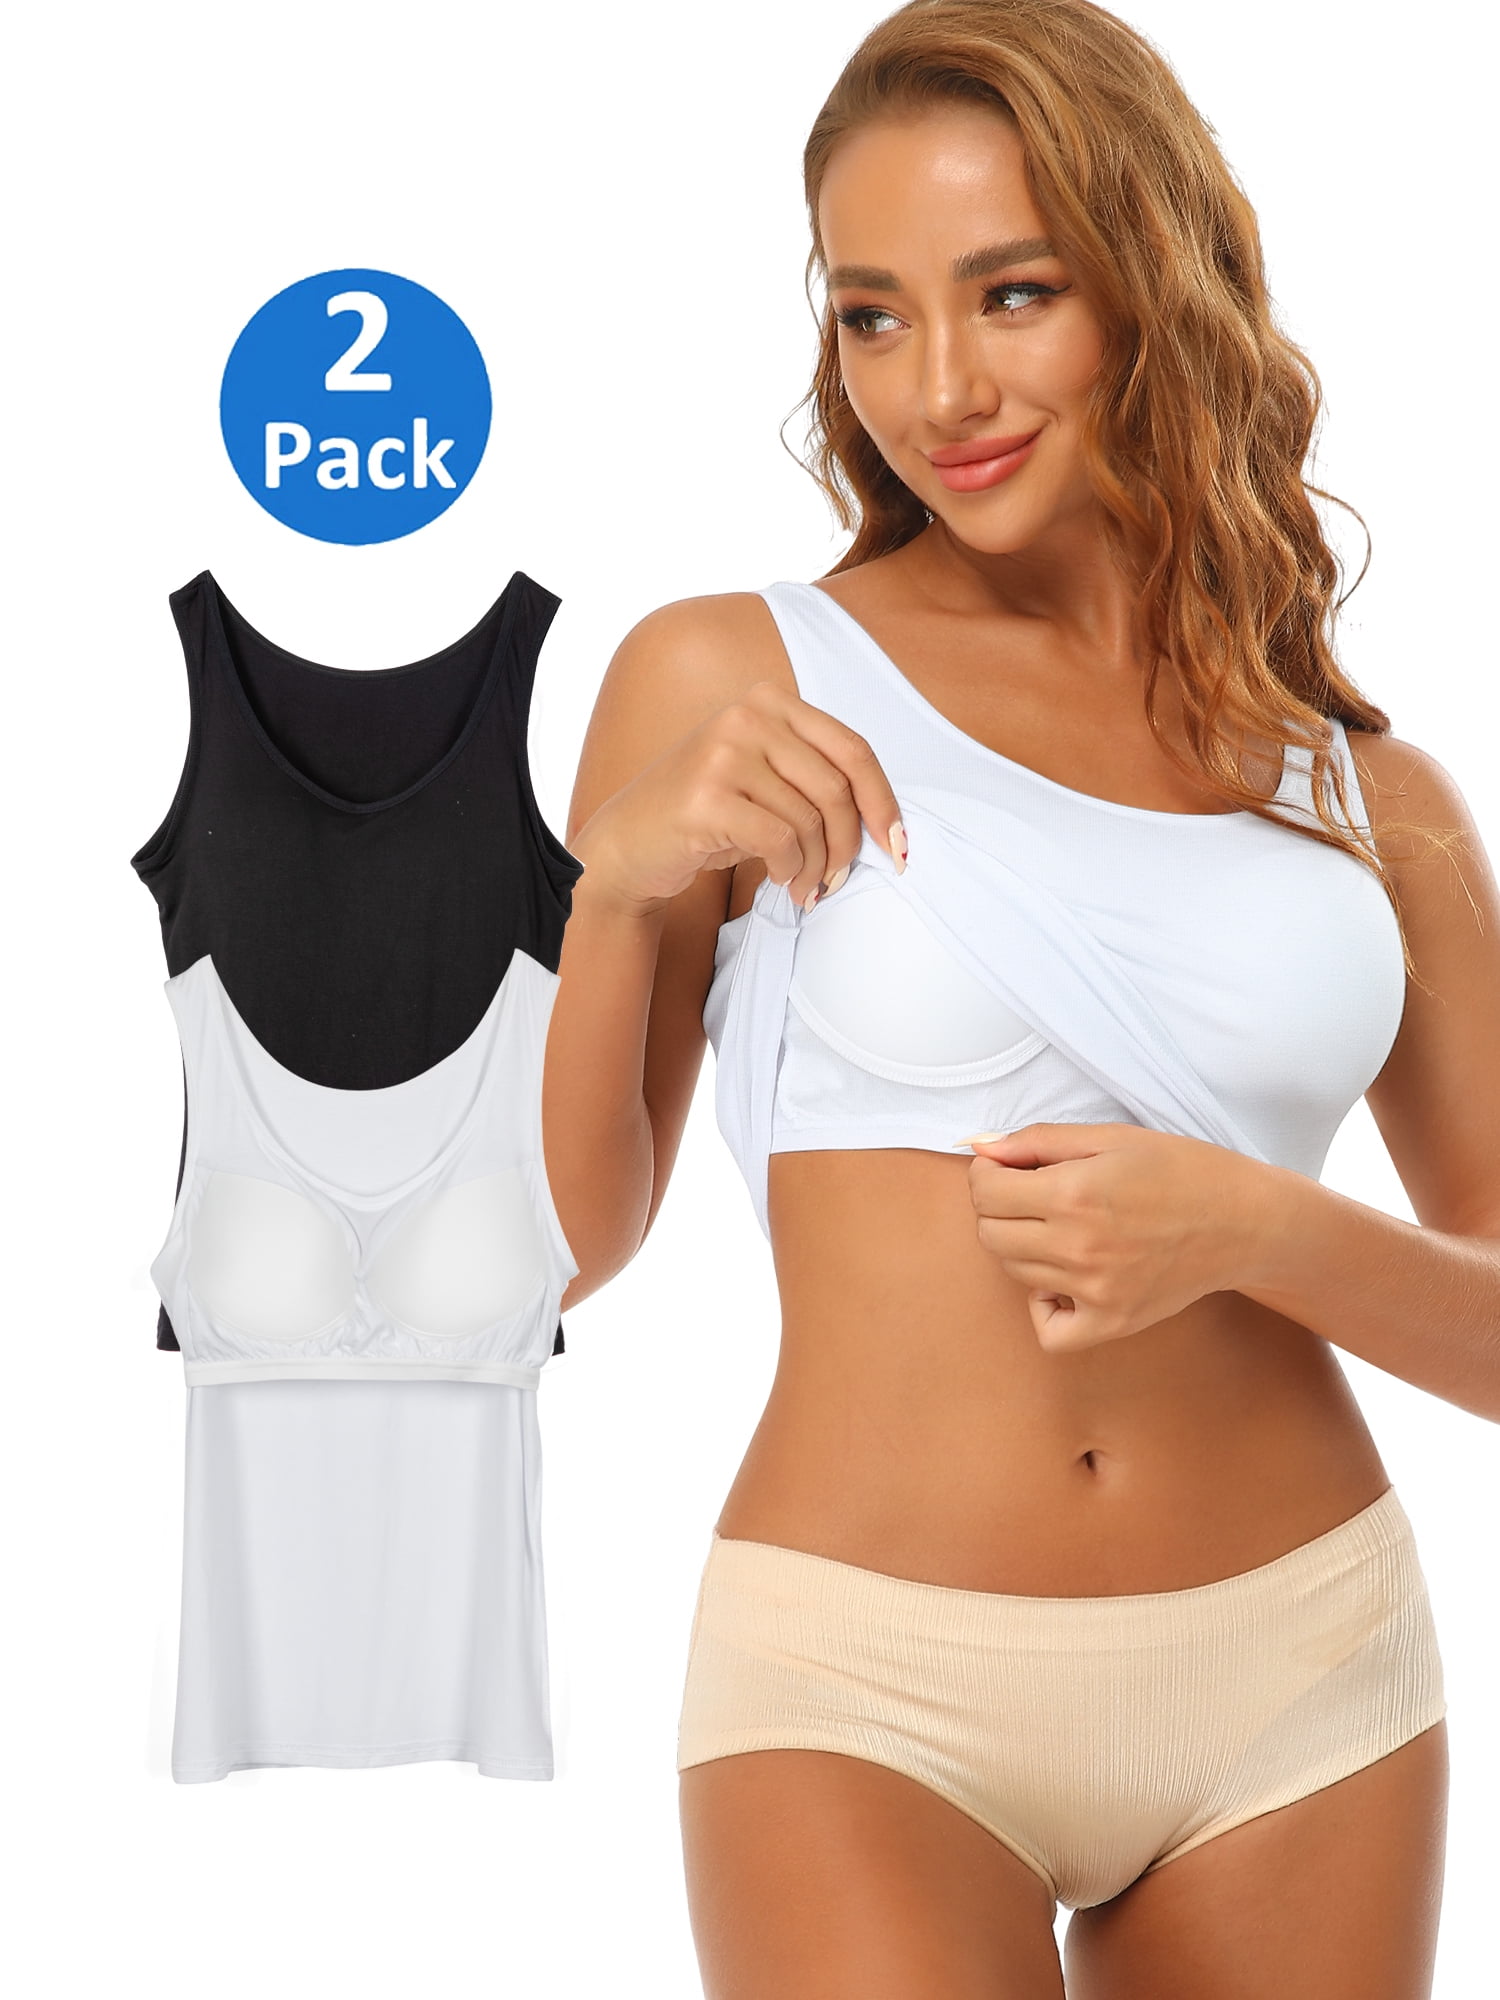 Women 2 in 1 Built-in Shoulder Pad Female Breathable Fitness Tops